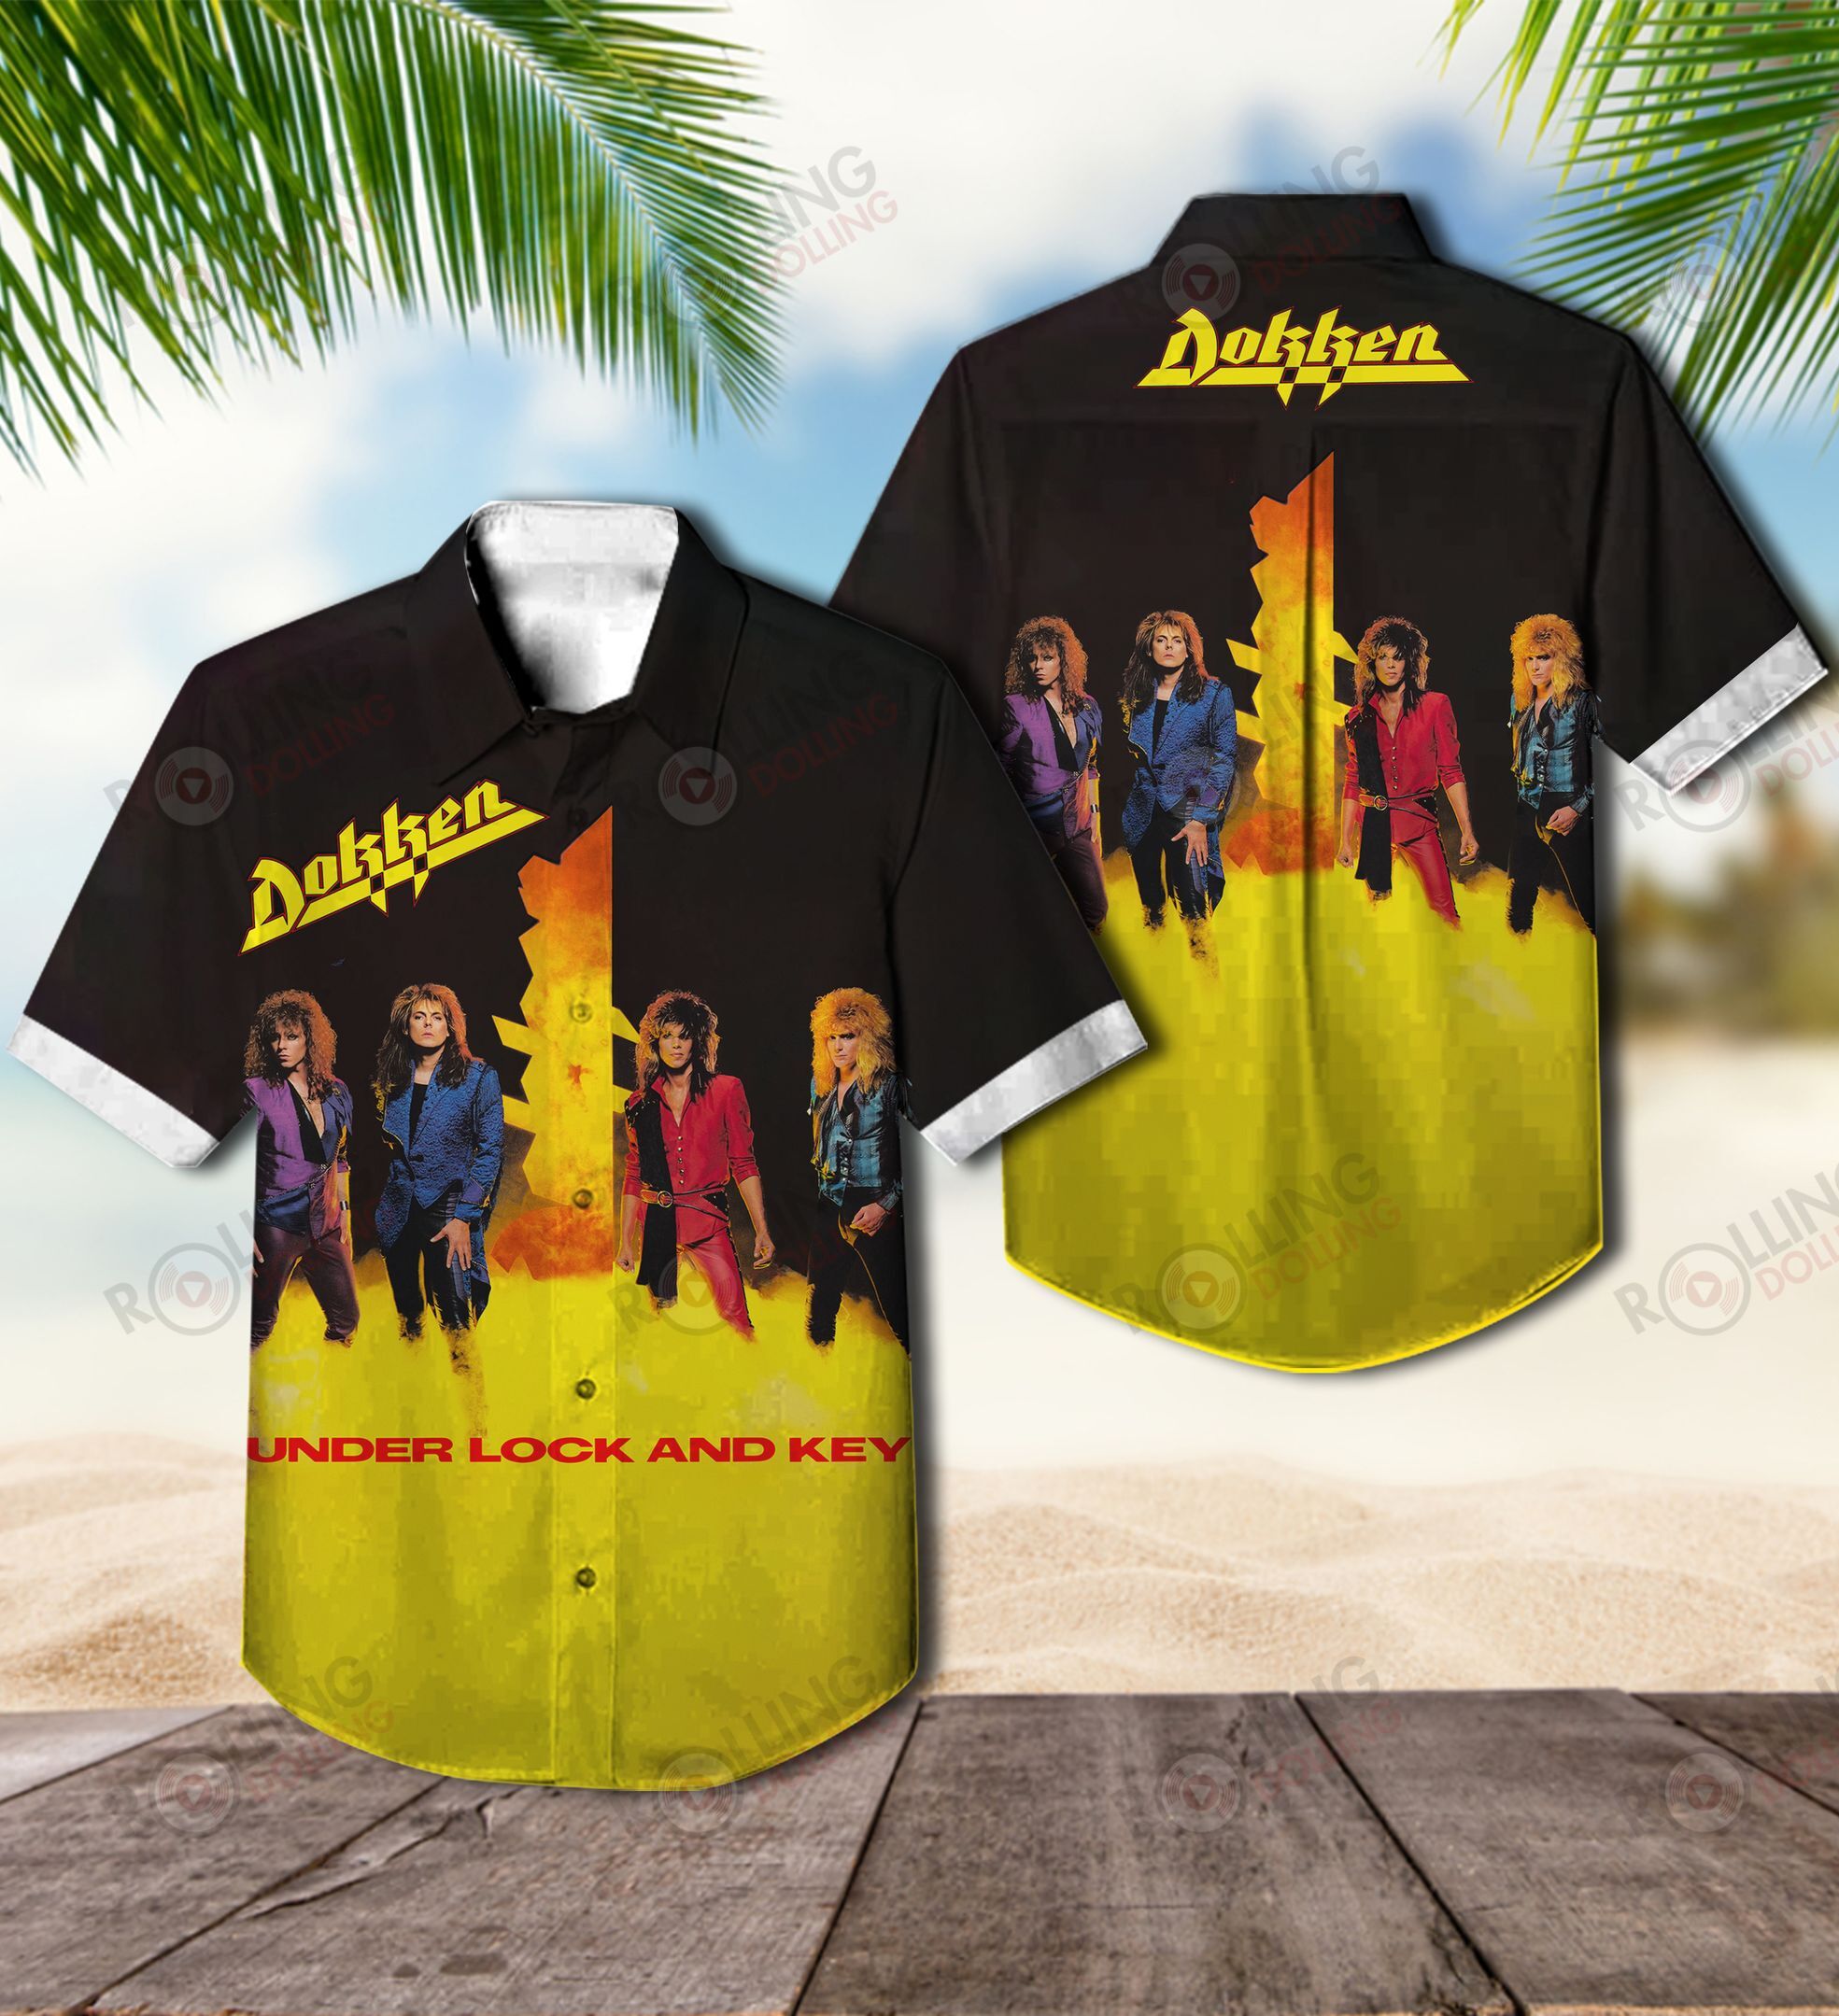 The Hawaiian Shirt is a popular shirt that is worn by Rock band fans 16